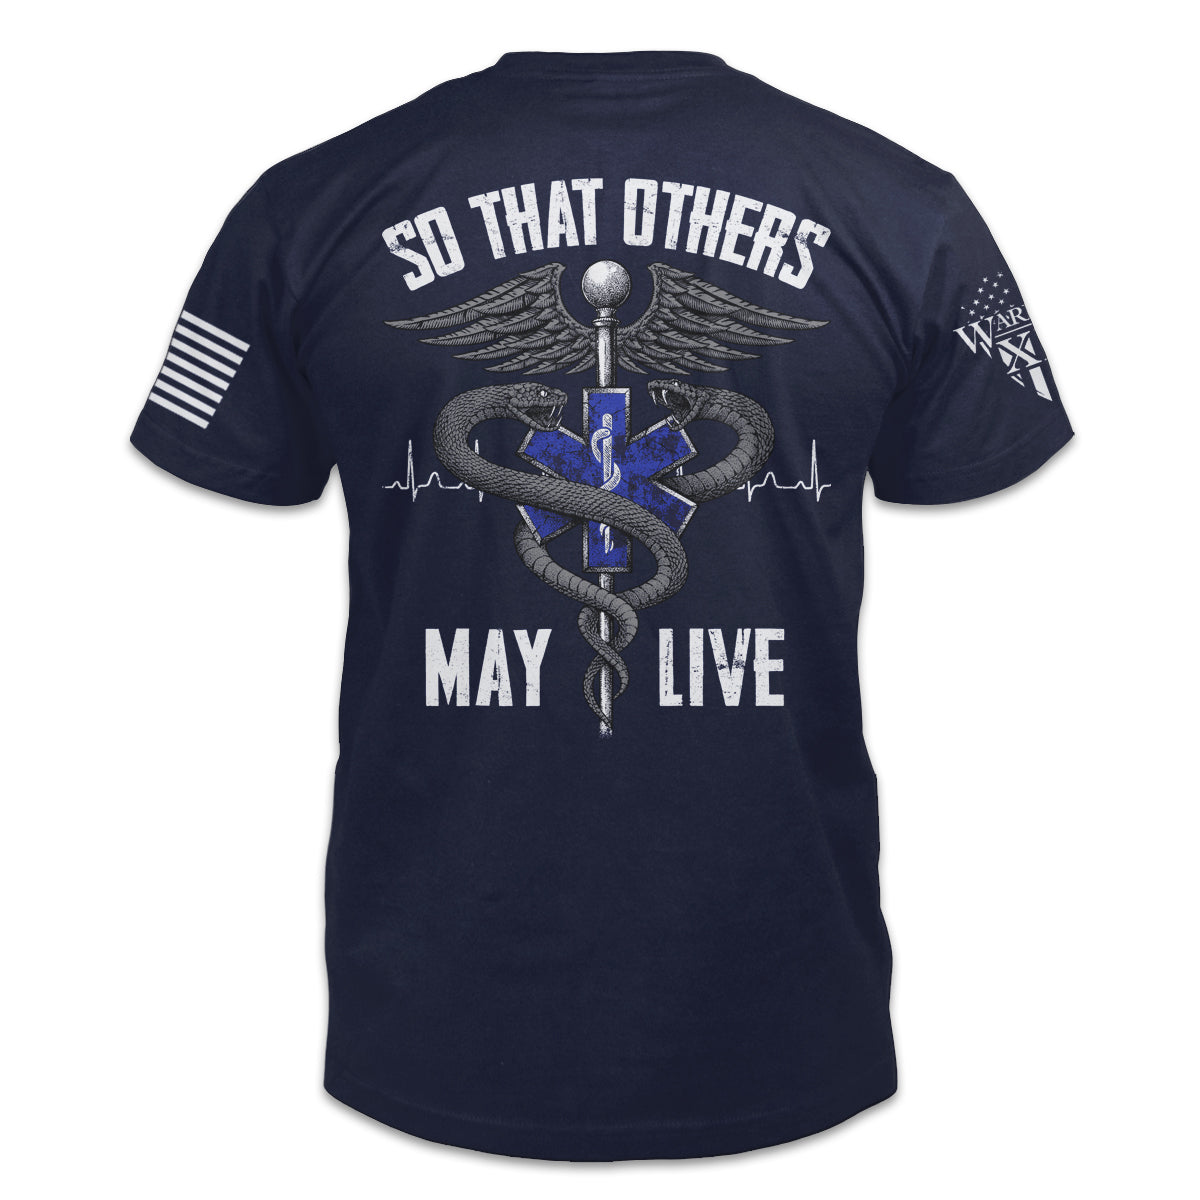 A navy blue t-shirt with the words "So That Others May Live" with the health symbol printed on the back of the shirt.